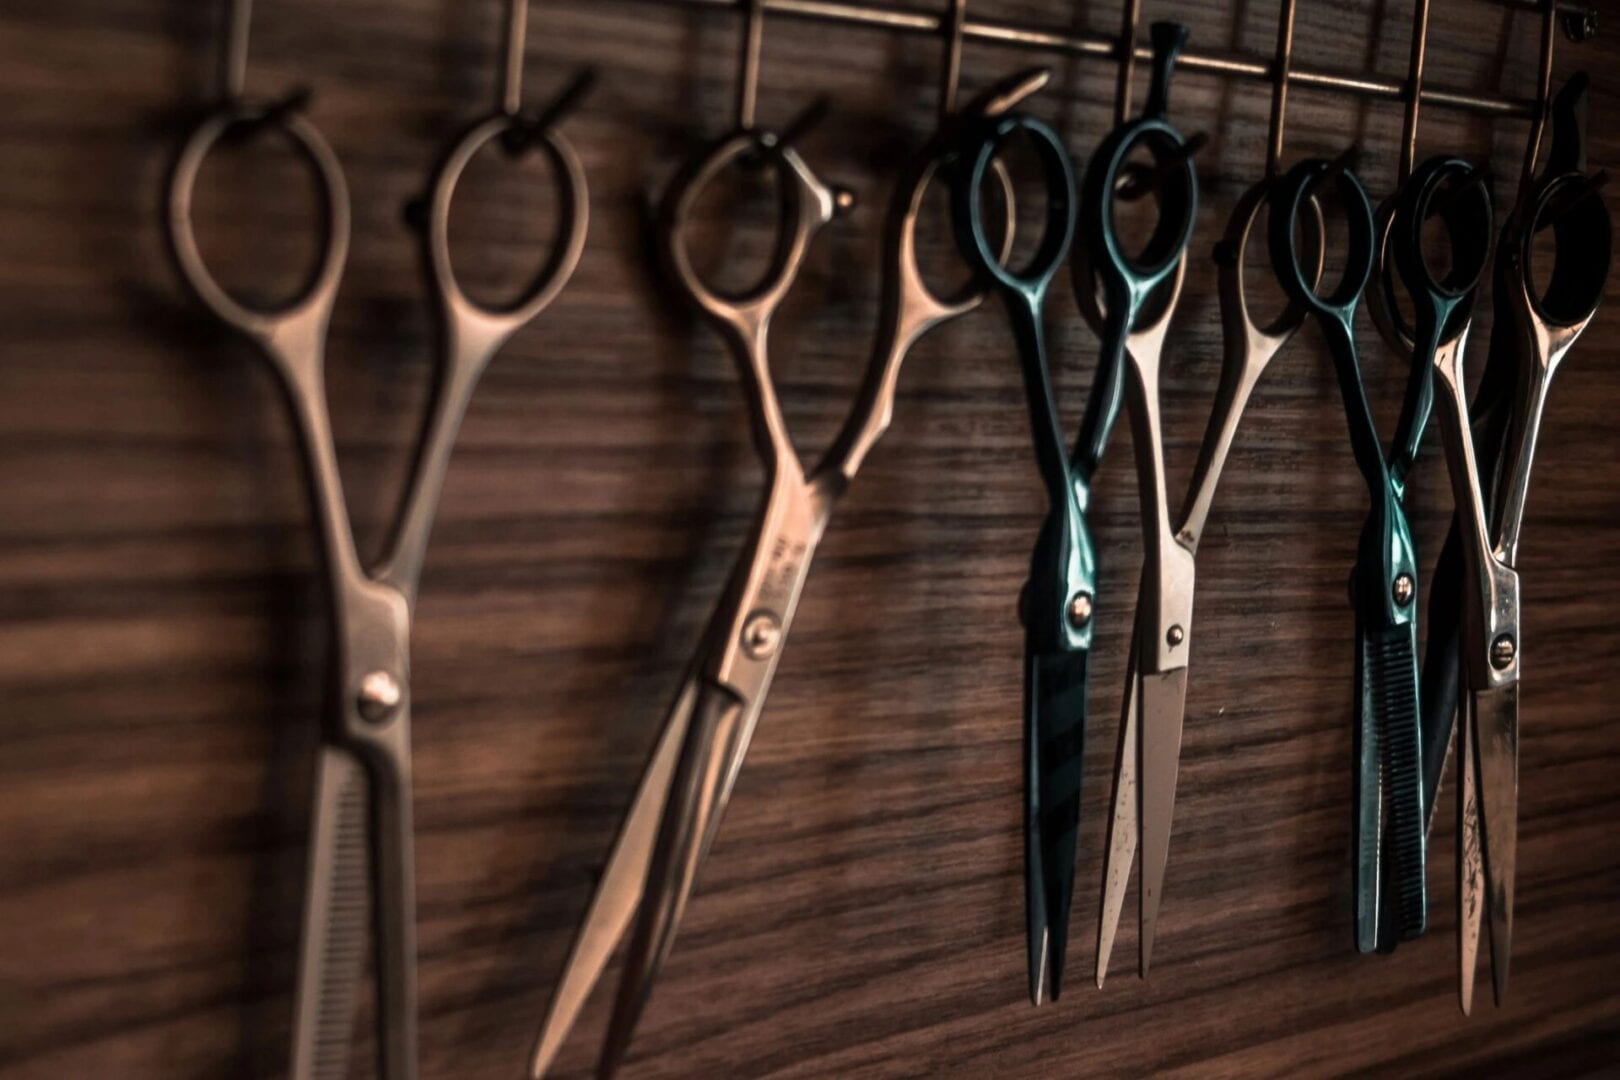 A row of scissors hanging on the wall.